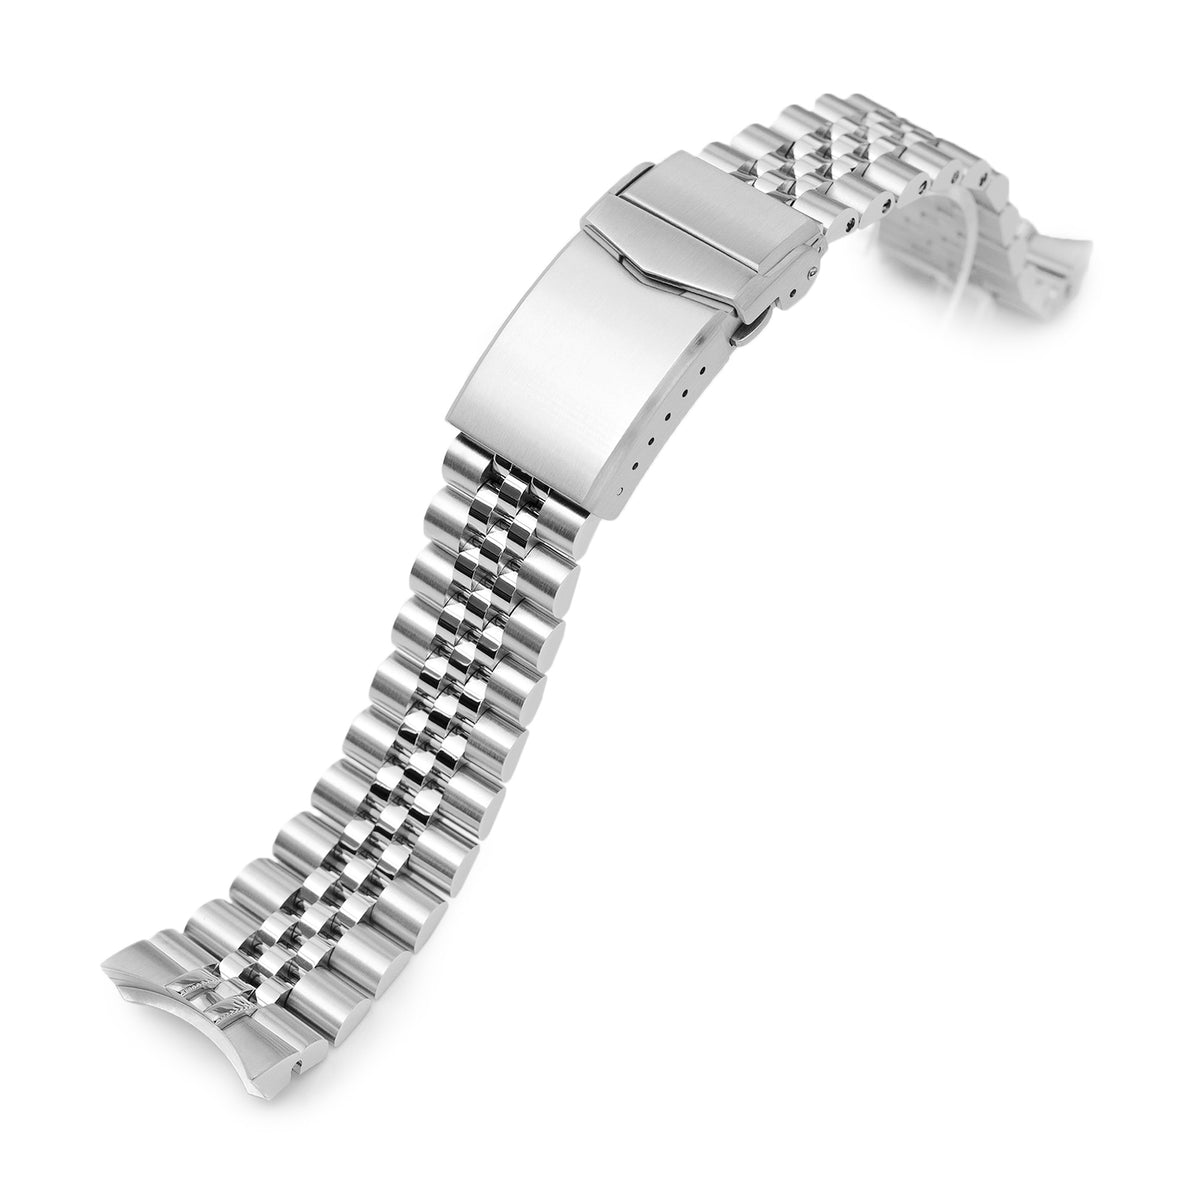 22mm Super-J Louis JUB Watch Band compatible with Orient Kamasu, 316L Stainless Steel Brushed V-Clasp